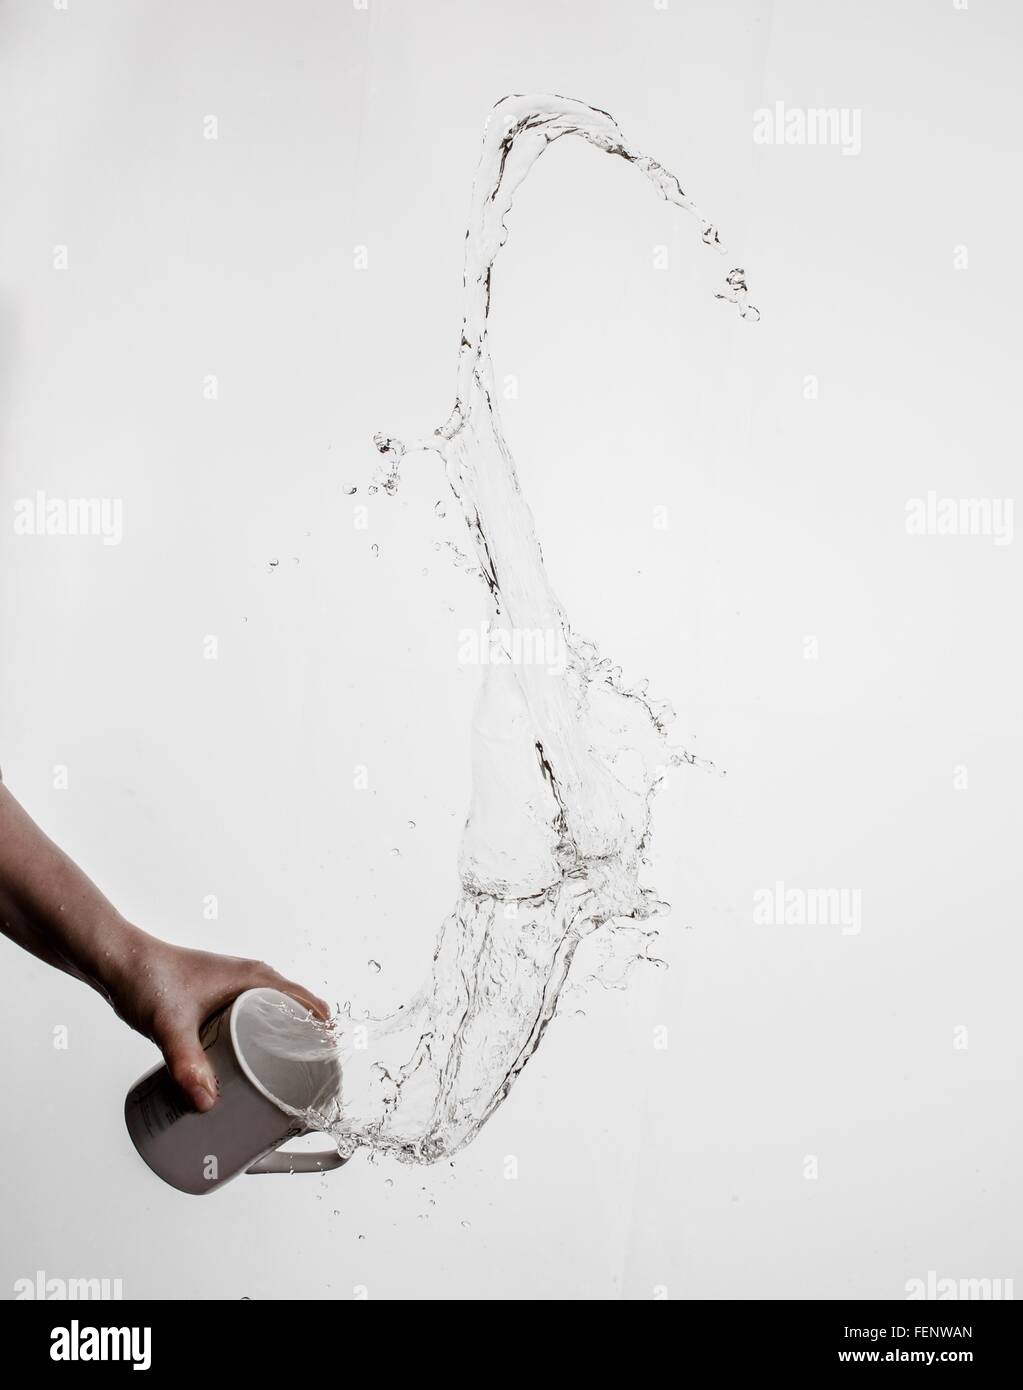 Person throwing mug of water, white background Stock Photo